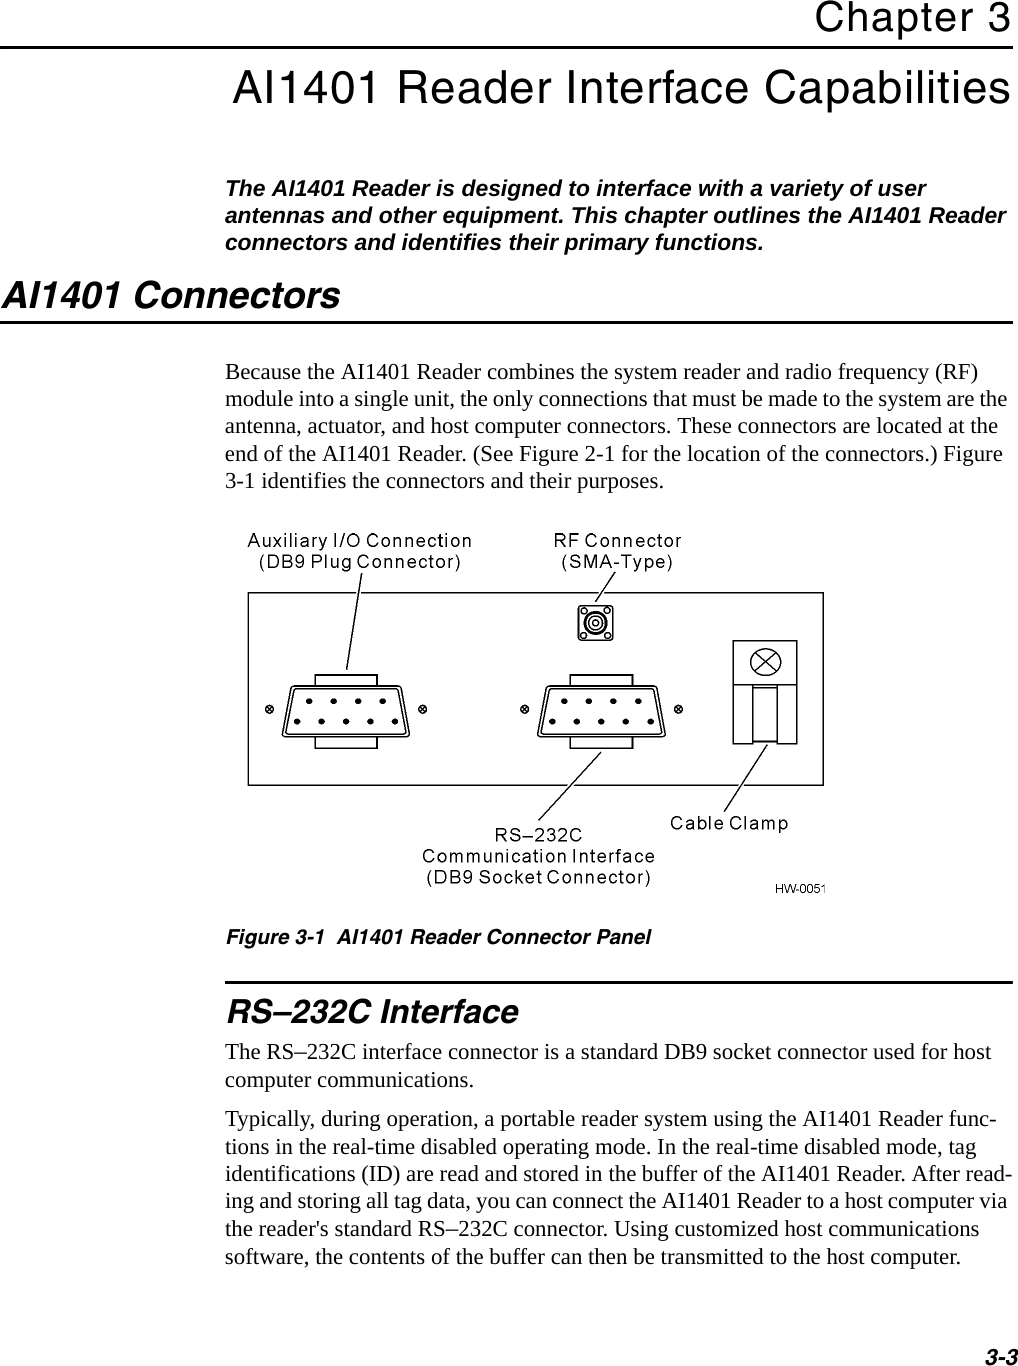 3-3Chapter 3AI1401 Reader Interface CapabilitiesThe AI1401 Reader is designed to interface with a variety of user antennas and other equipment. This chapter outlines the AI1401 Reader connectors and identifies their primary functions.AI1401 ConnectorsBecause the AI1401 Reader combines the system reader and radio frequency (RF) module into a single unit, the only connections that must be made to the system are the antenna, actuator, and host computer connectors. These connectors are located at the end of the AI1401 Reader. (See Figure 2-1 for the location of the connectors.) Figure 3-1 identifies the connectors and their purposes.Figure 3-1  AI1401 Reader Connector PanelRS–232C InterfaceThe RS–232C interface connector is a standard DB9 socket connector used for host computer communications.Typically, during operation, a portable reader system using the AI1401 Reader func-tions in the real-time disabled operating mode. In the real-time disabled mode, tag identifications (ID) are read and stored in the buffer of the AI1401 Reader. After read-ing and storing all tag data, you can connect the AI1401 Reader to a host computer via the reader&apos;s standard RS–232C connector. Using customized host communications software, the contents of the buffer can then be transmitted to the host computer.